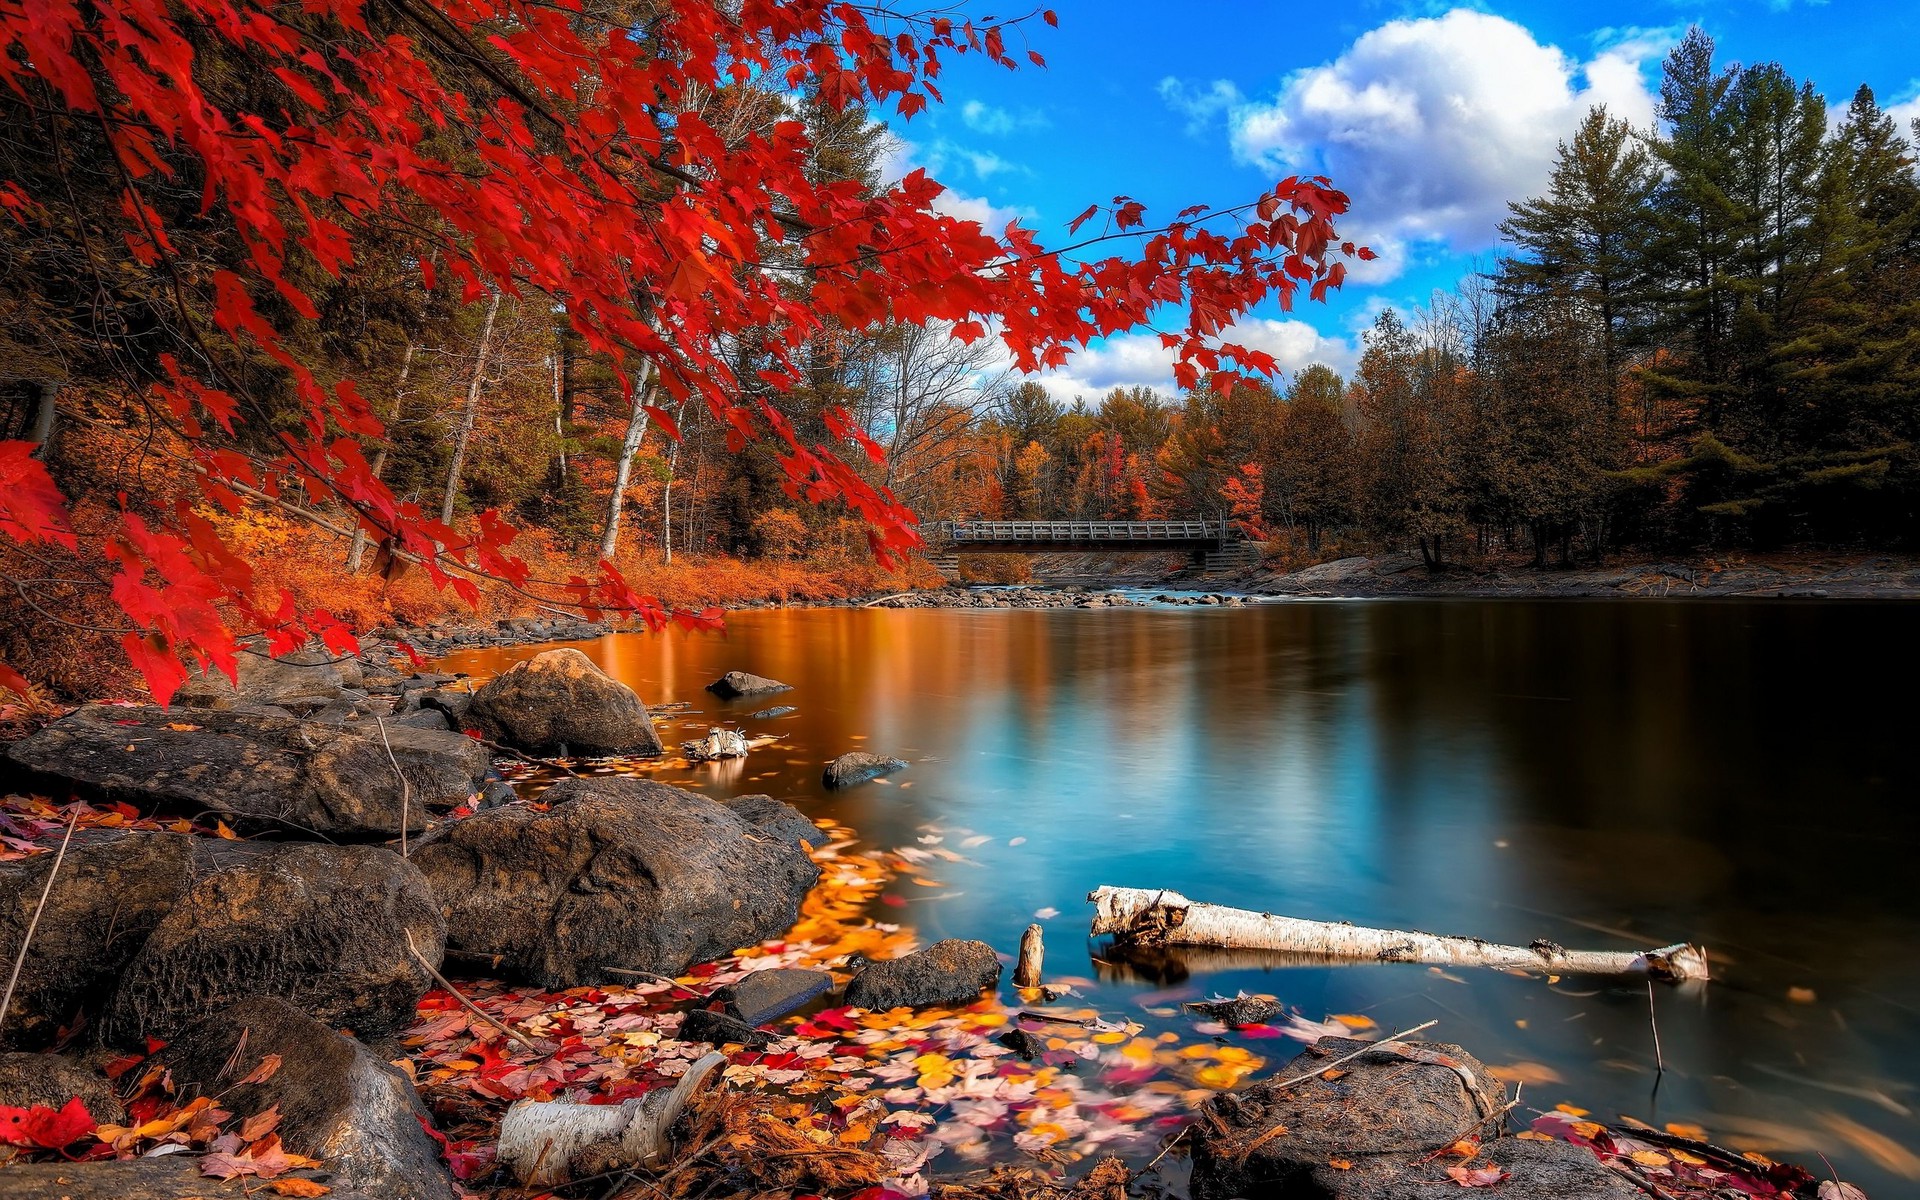 Wallpaper, landscape, forest, fall, anime, lake, water, rock, nature, reflection, sky, branch, river, national park, wilderness, pond, stream, spring, Bank, tree, autumn, plant, watercourse, 1920x1200 px, computer wallpaper, maple leaf, state